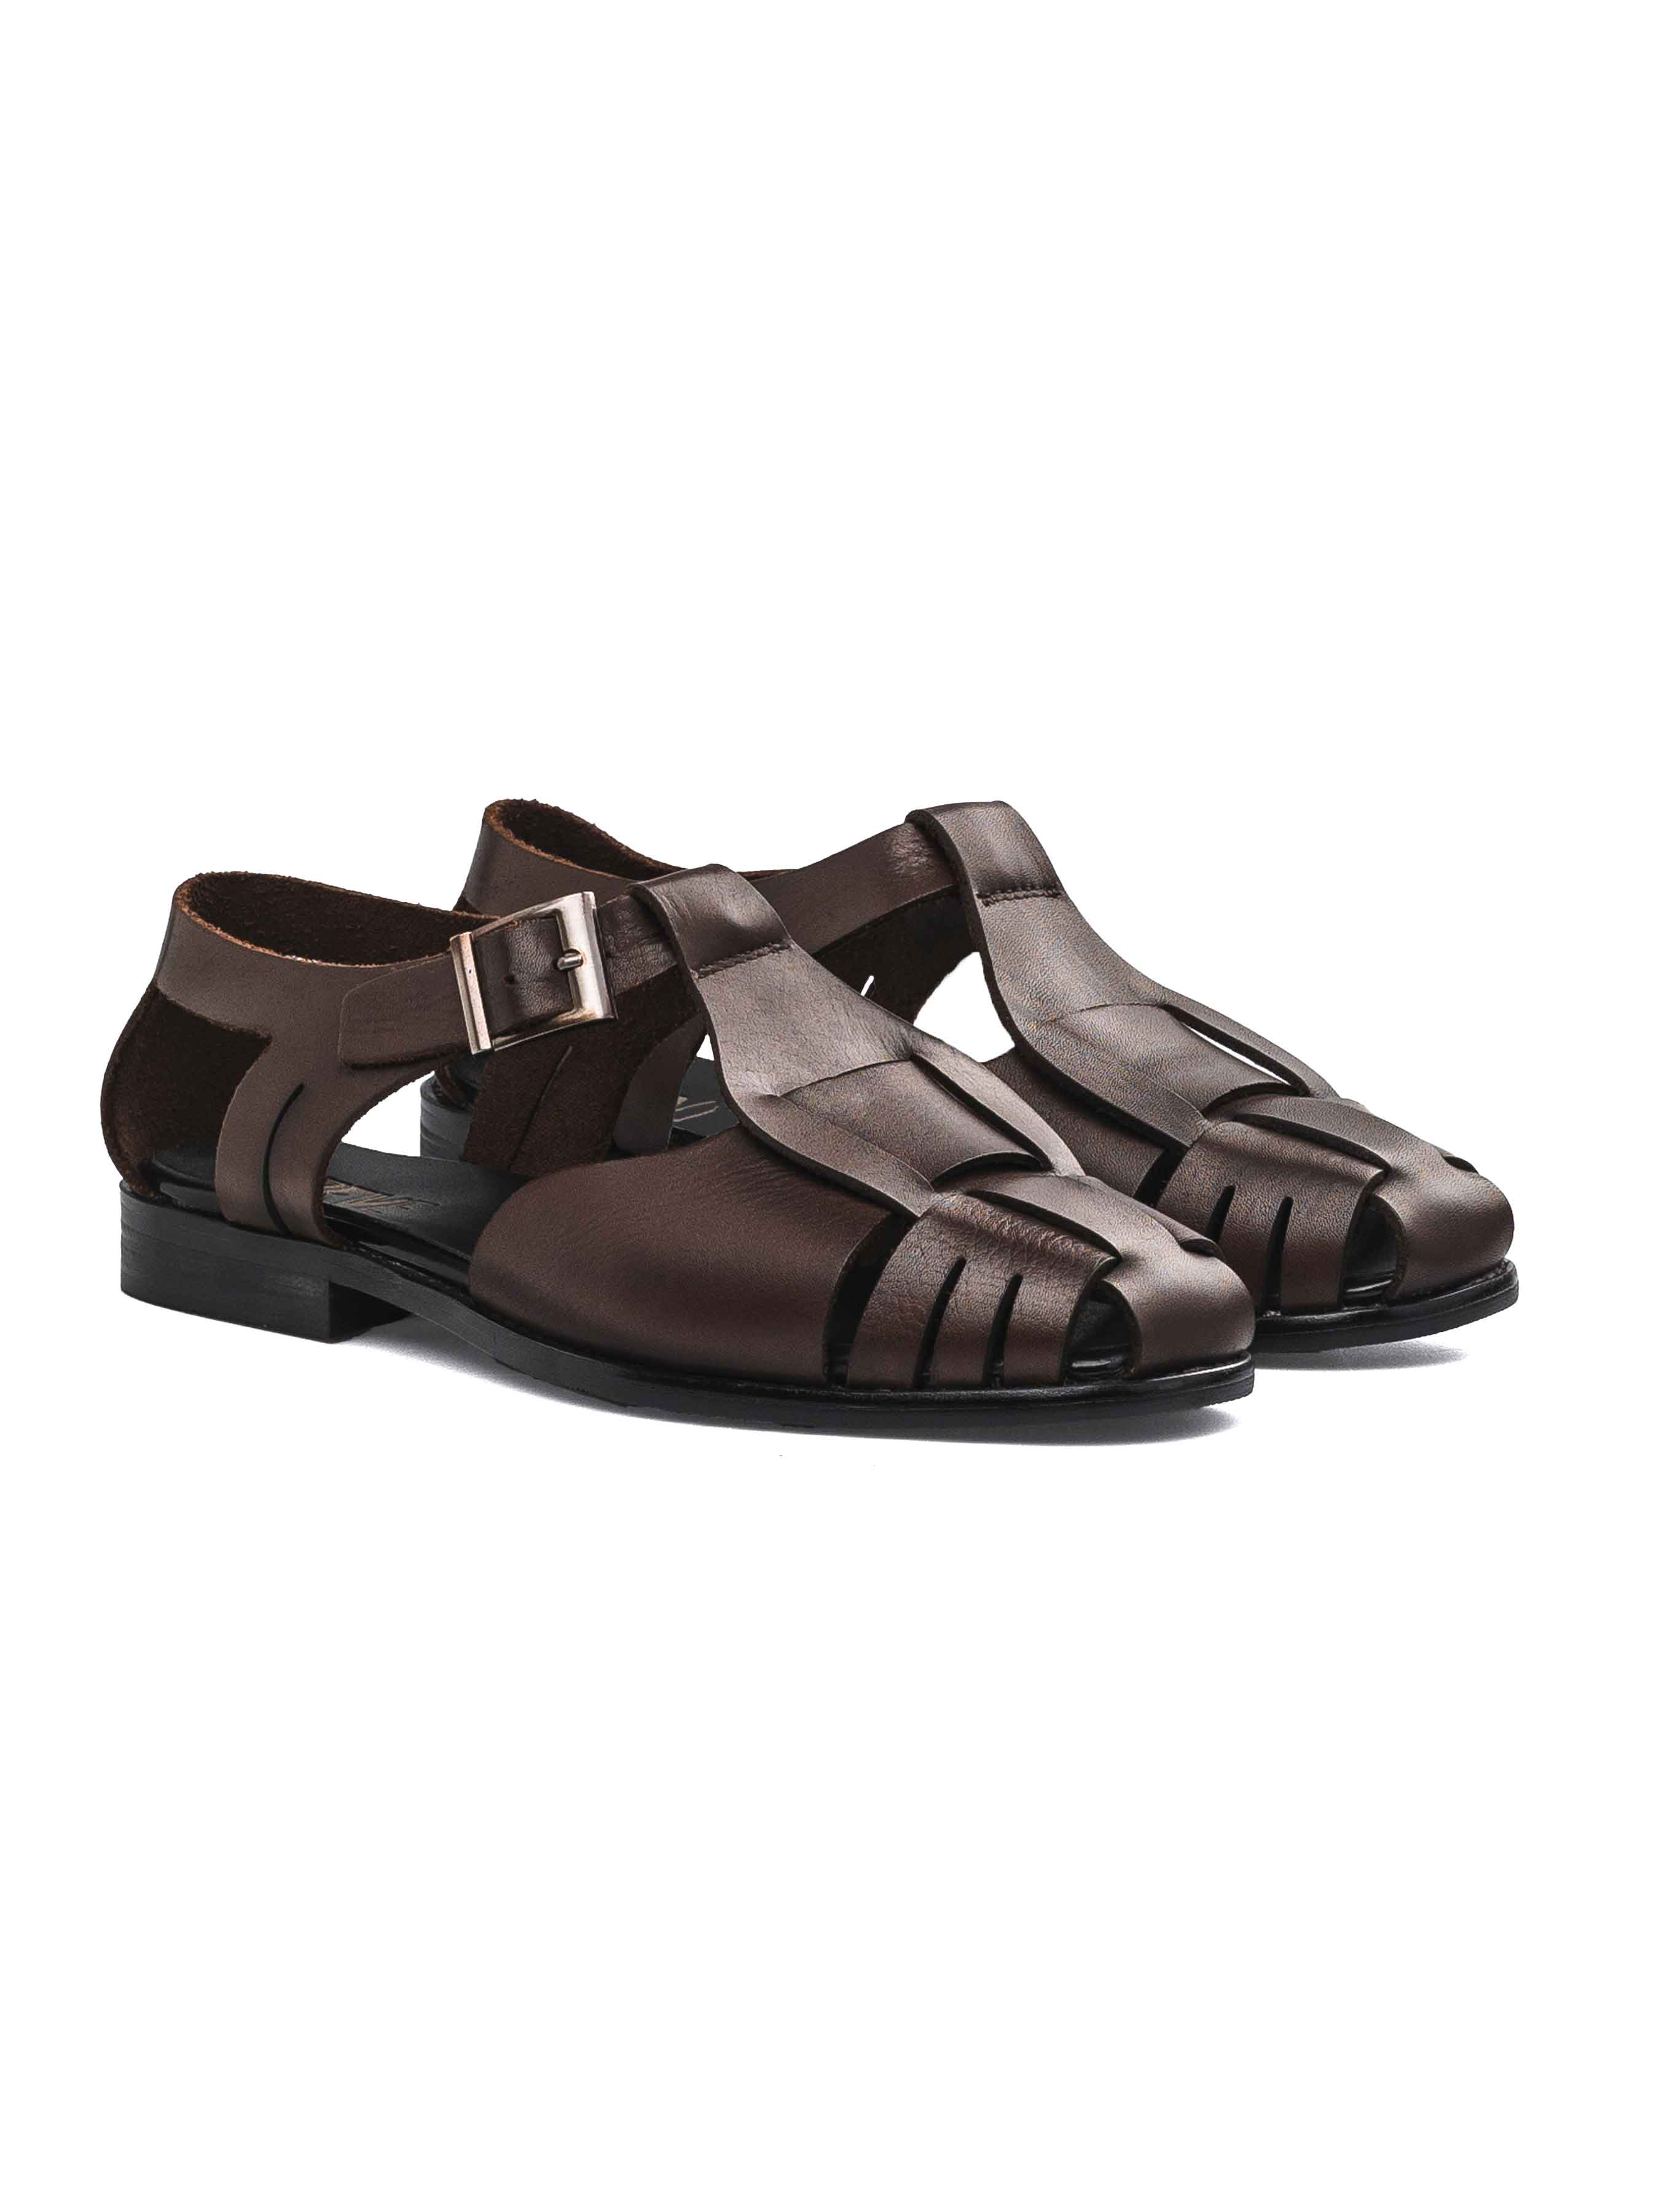 Liam Caged Sandal - Dark Brown (Hand Painted Patina)